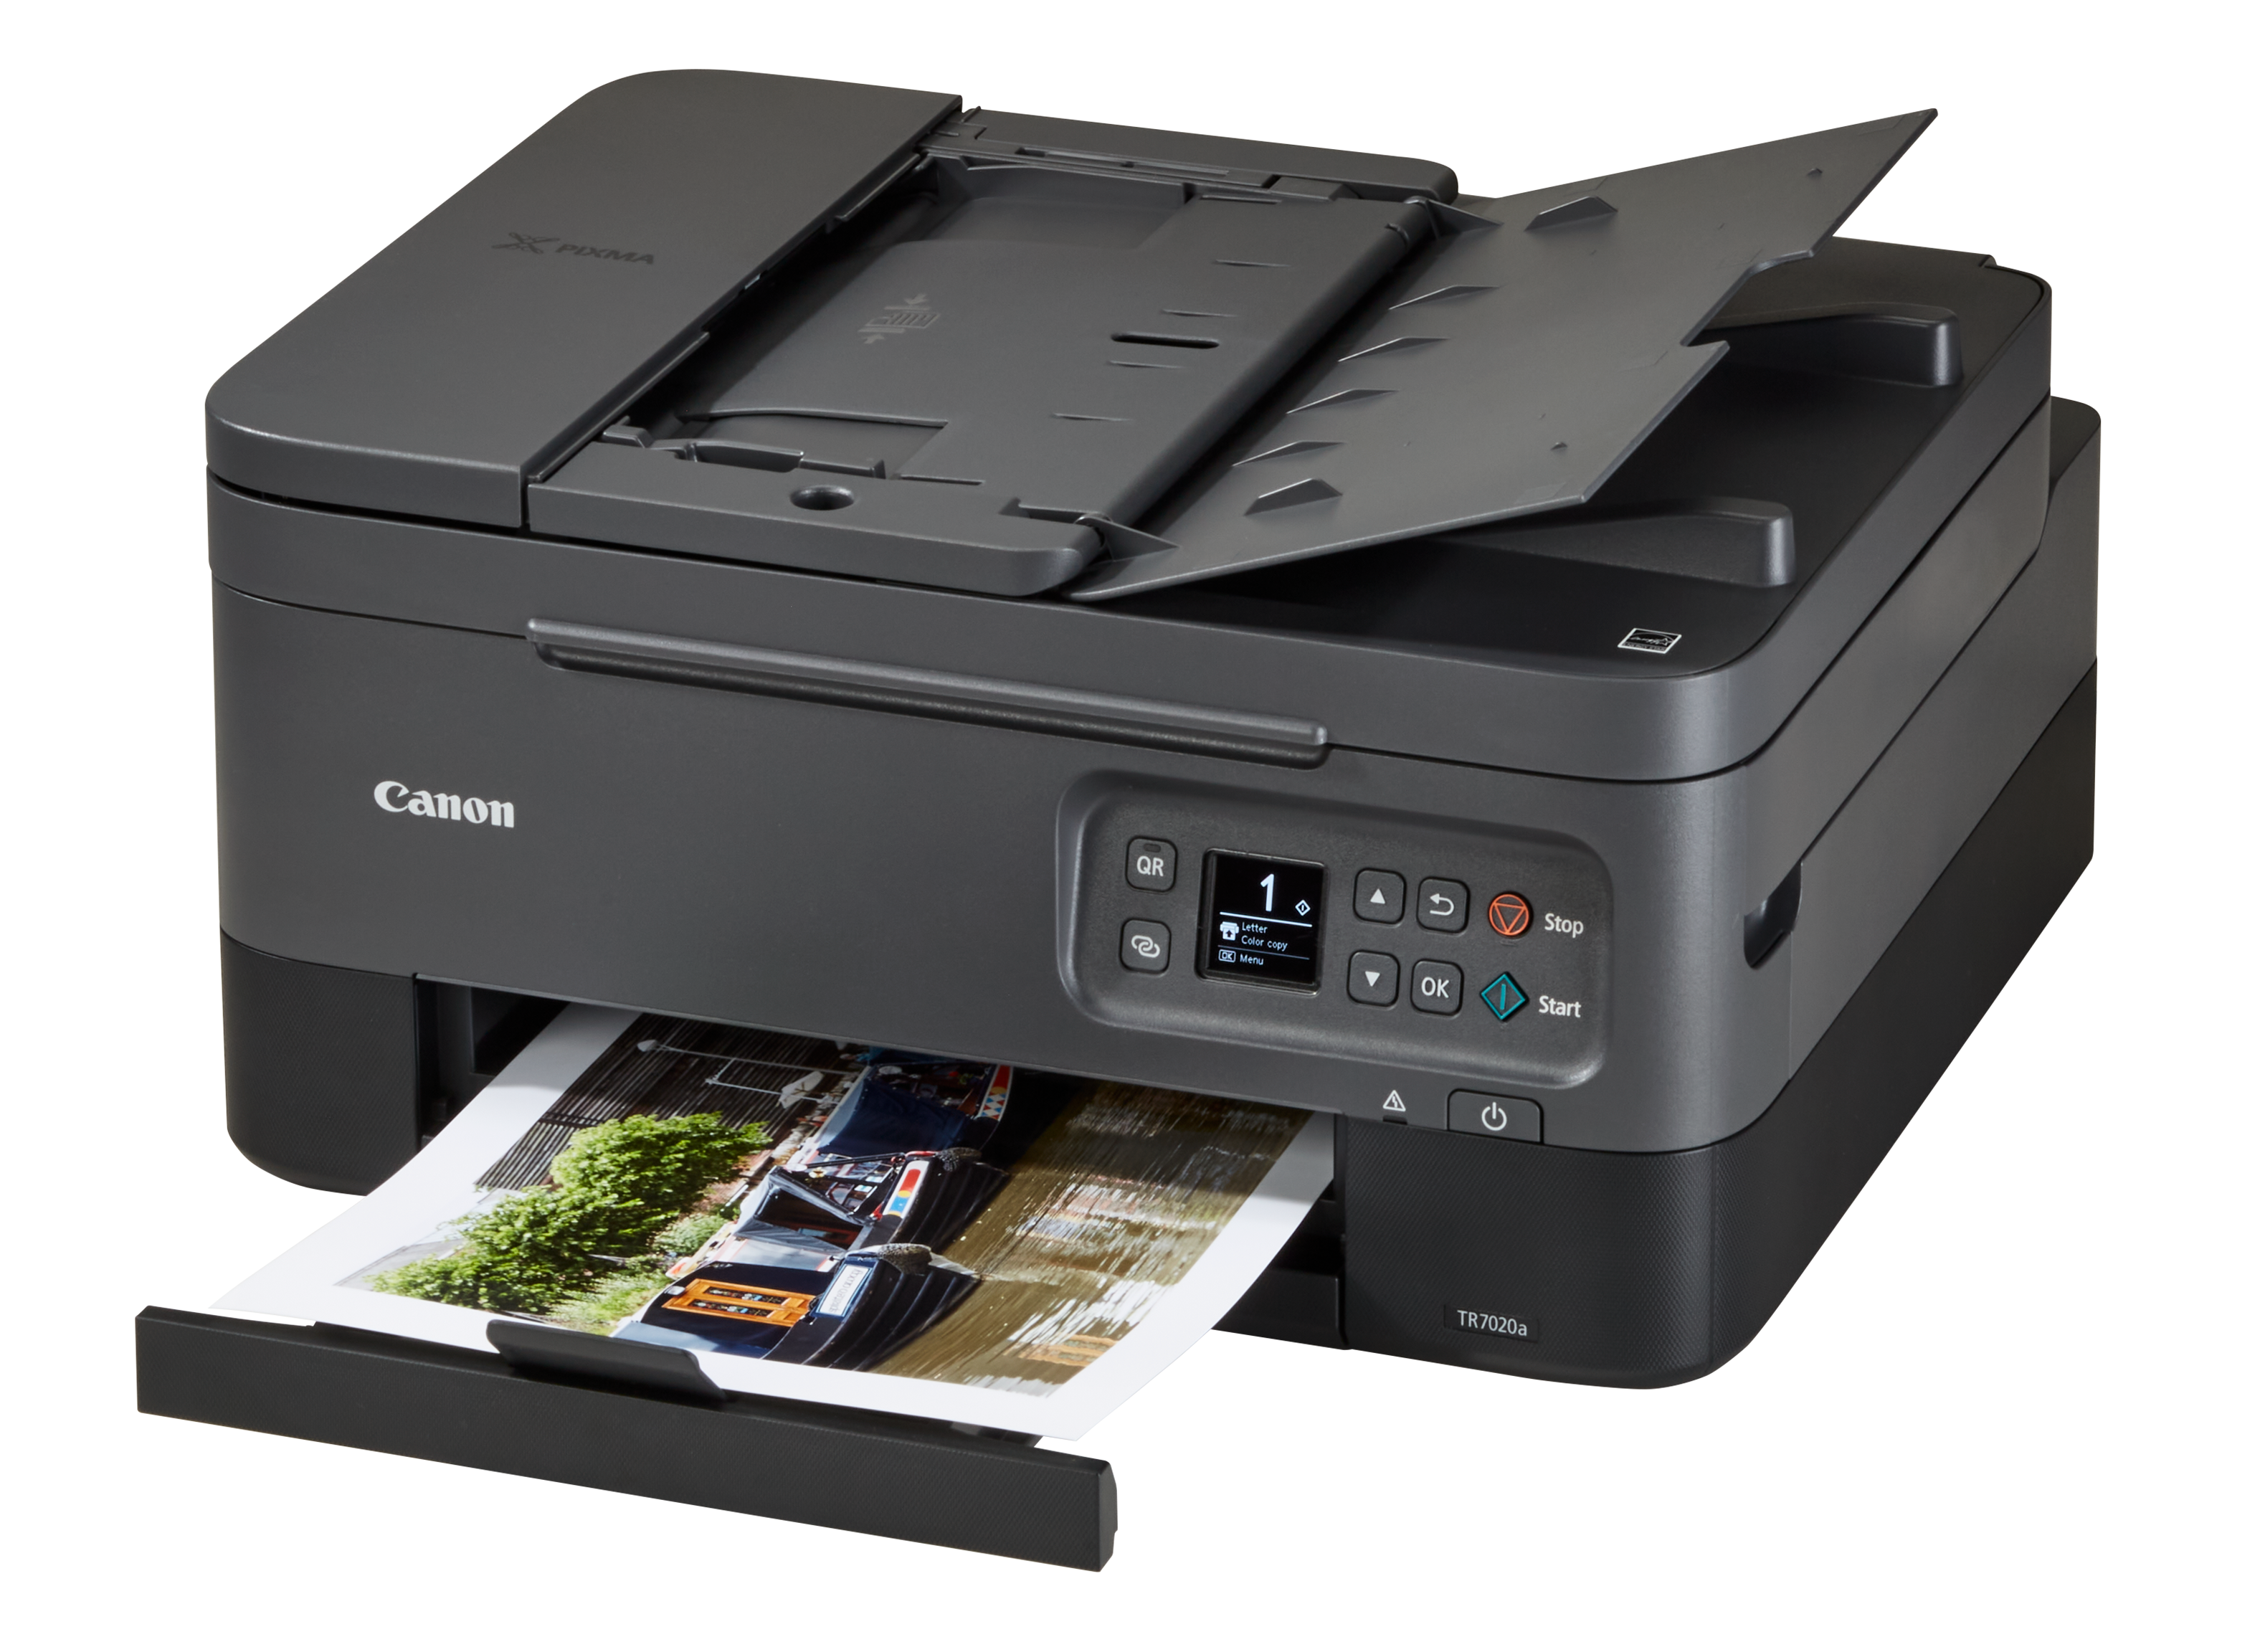 Canon PIXMA TR7020a Wireless All-In-One Inkjet Printer, Eligible for PIXMA  Print Plan Ink Subscription Service